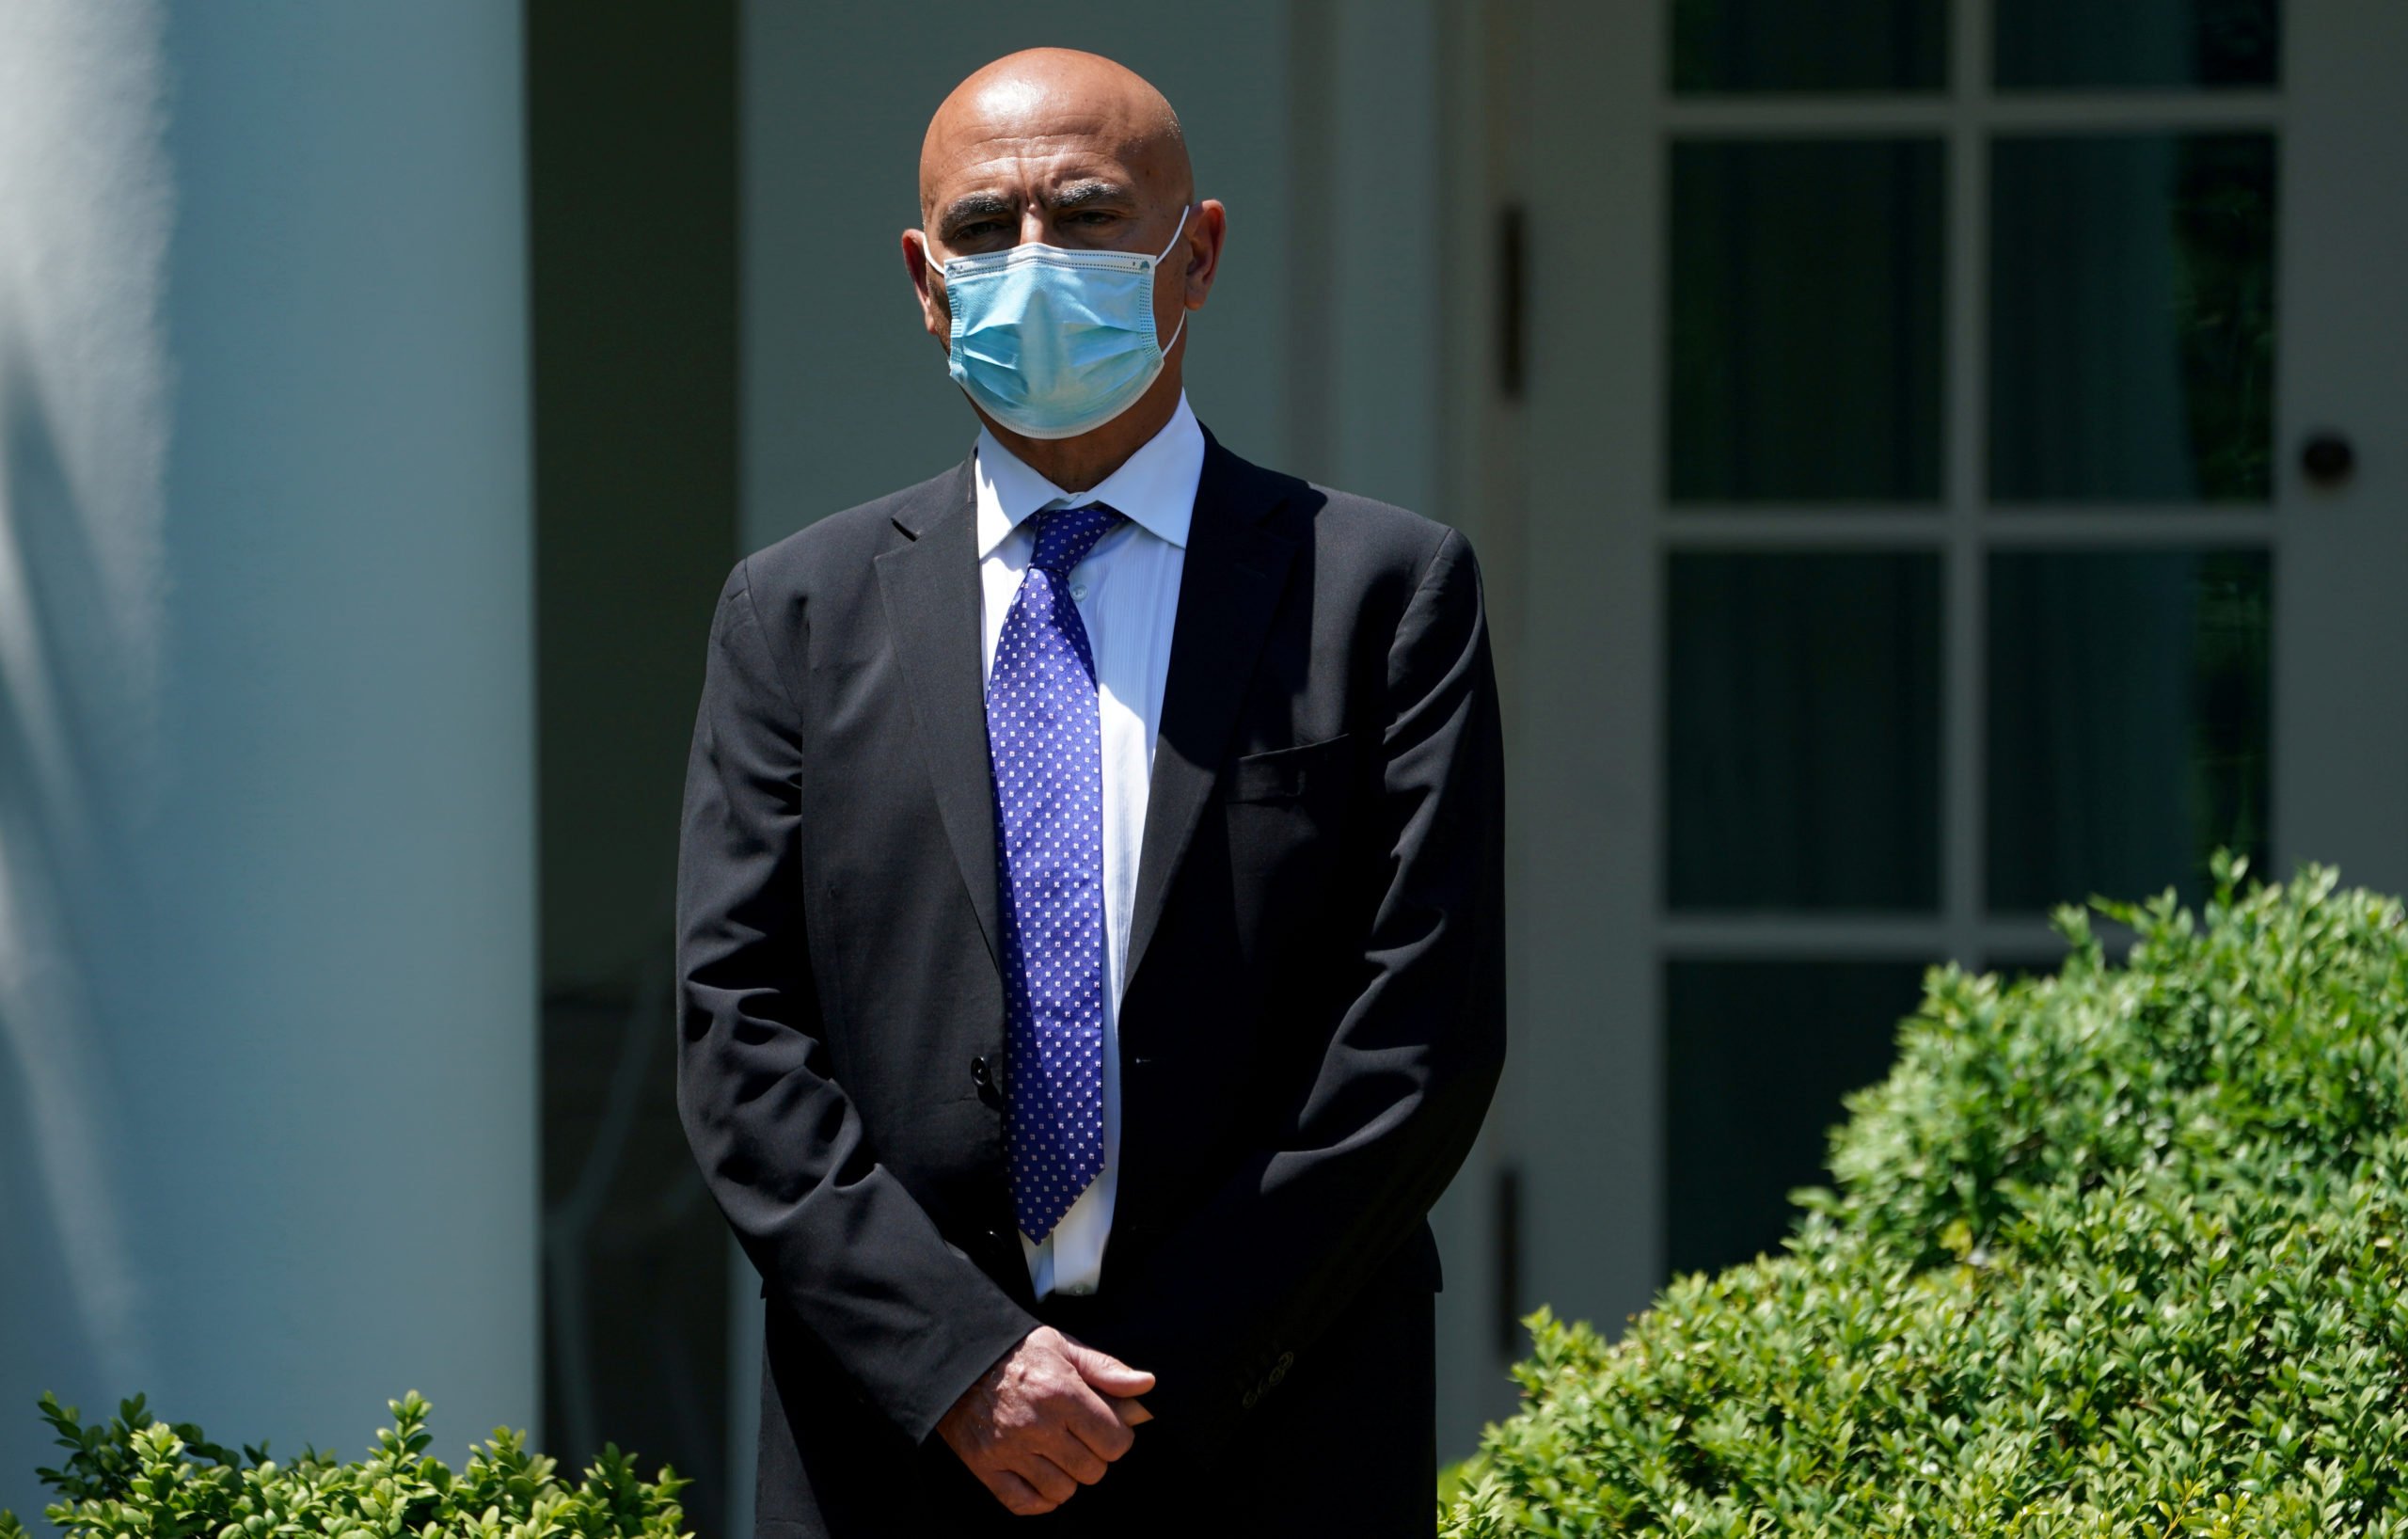  Former GlaxoSmithKline pharmaceutical executive Moncef Slaoui, who will serve as chief adviser on the effort to find a vaccine for the coronavirus disease (COVID-19) pandemic, waits to speak as President Donald Trump holds a coronavirus disease response event in the Rose Garden at the White House in Washington, U.S., May 15, 2020. REUTERS/Kevin Lamarque/File Photo